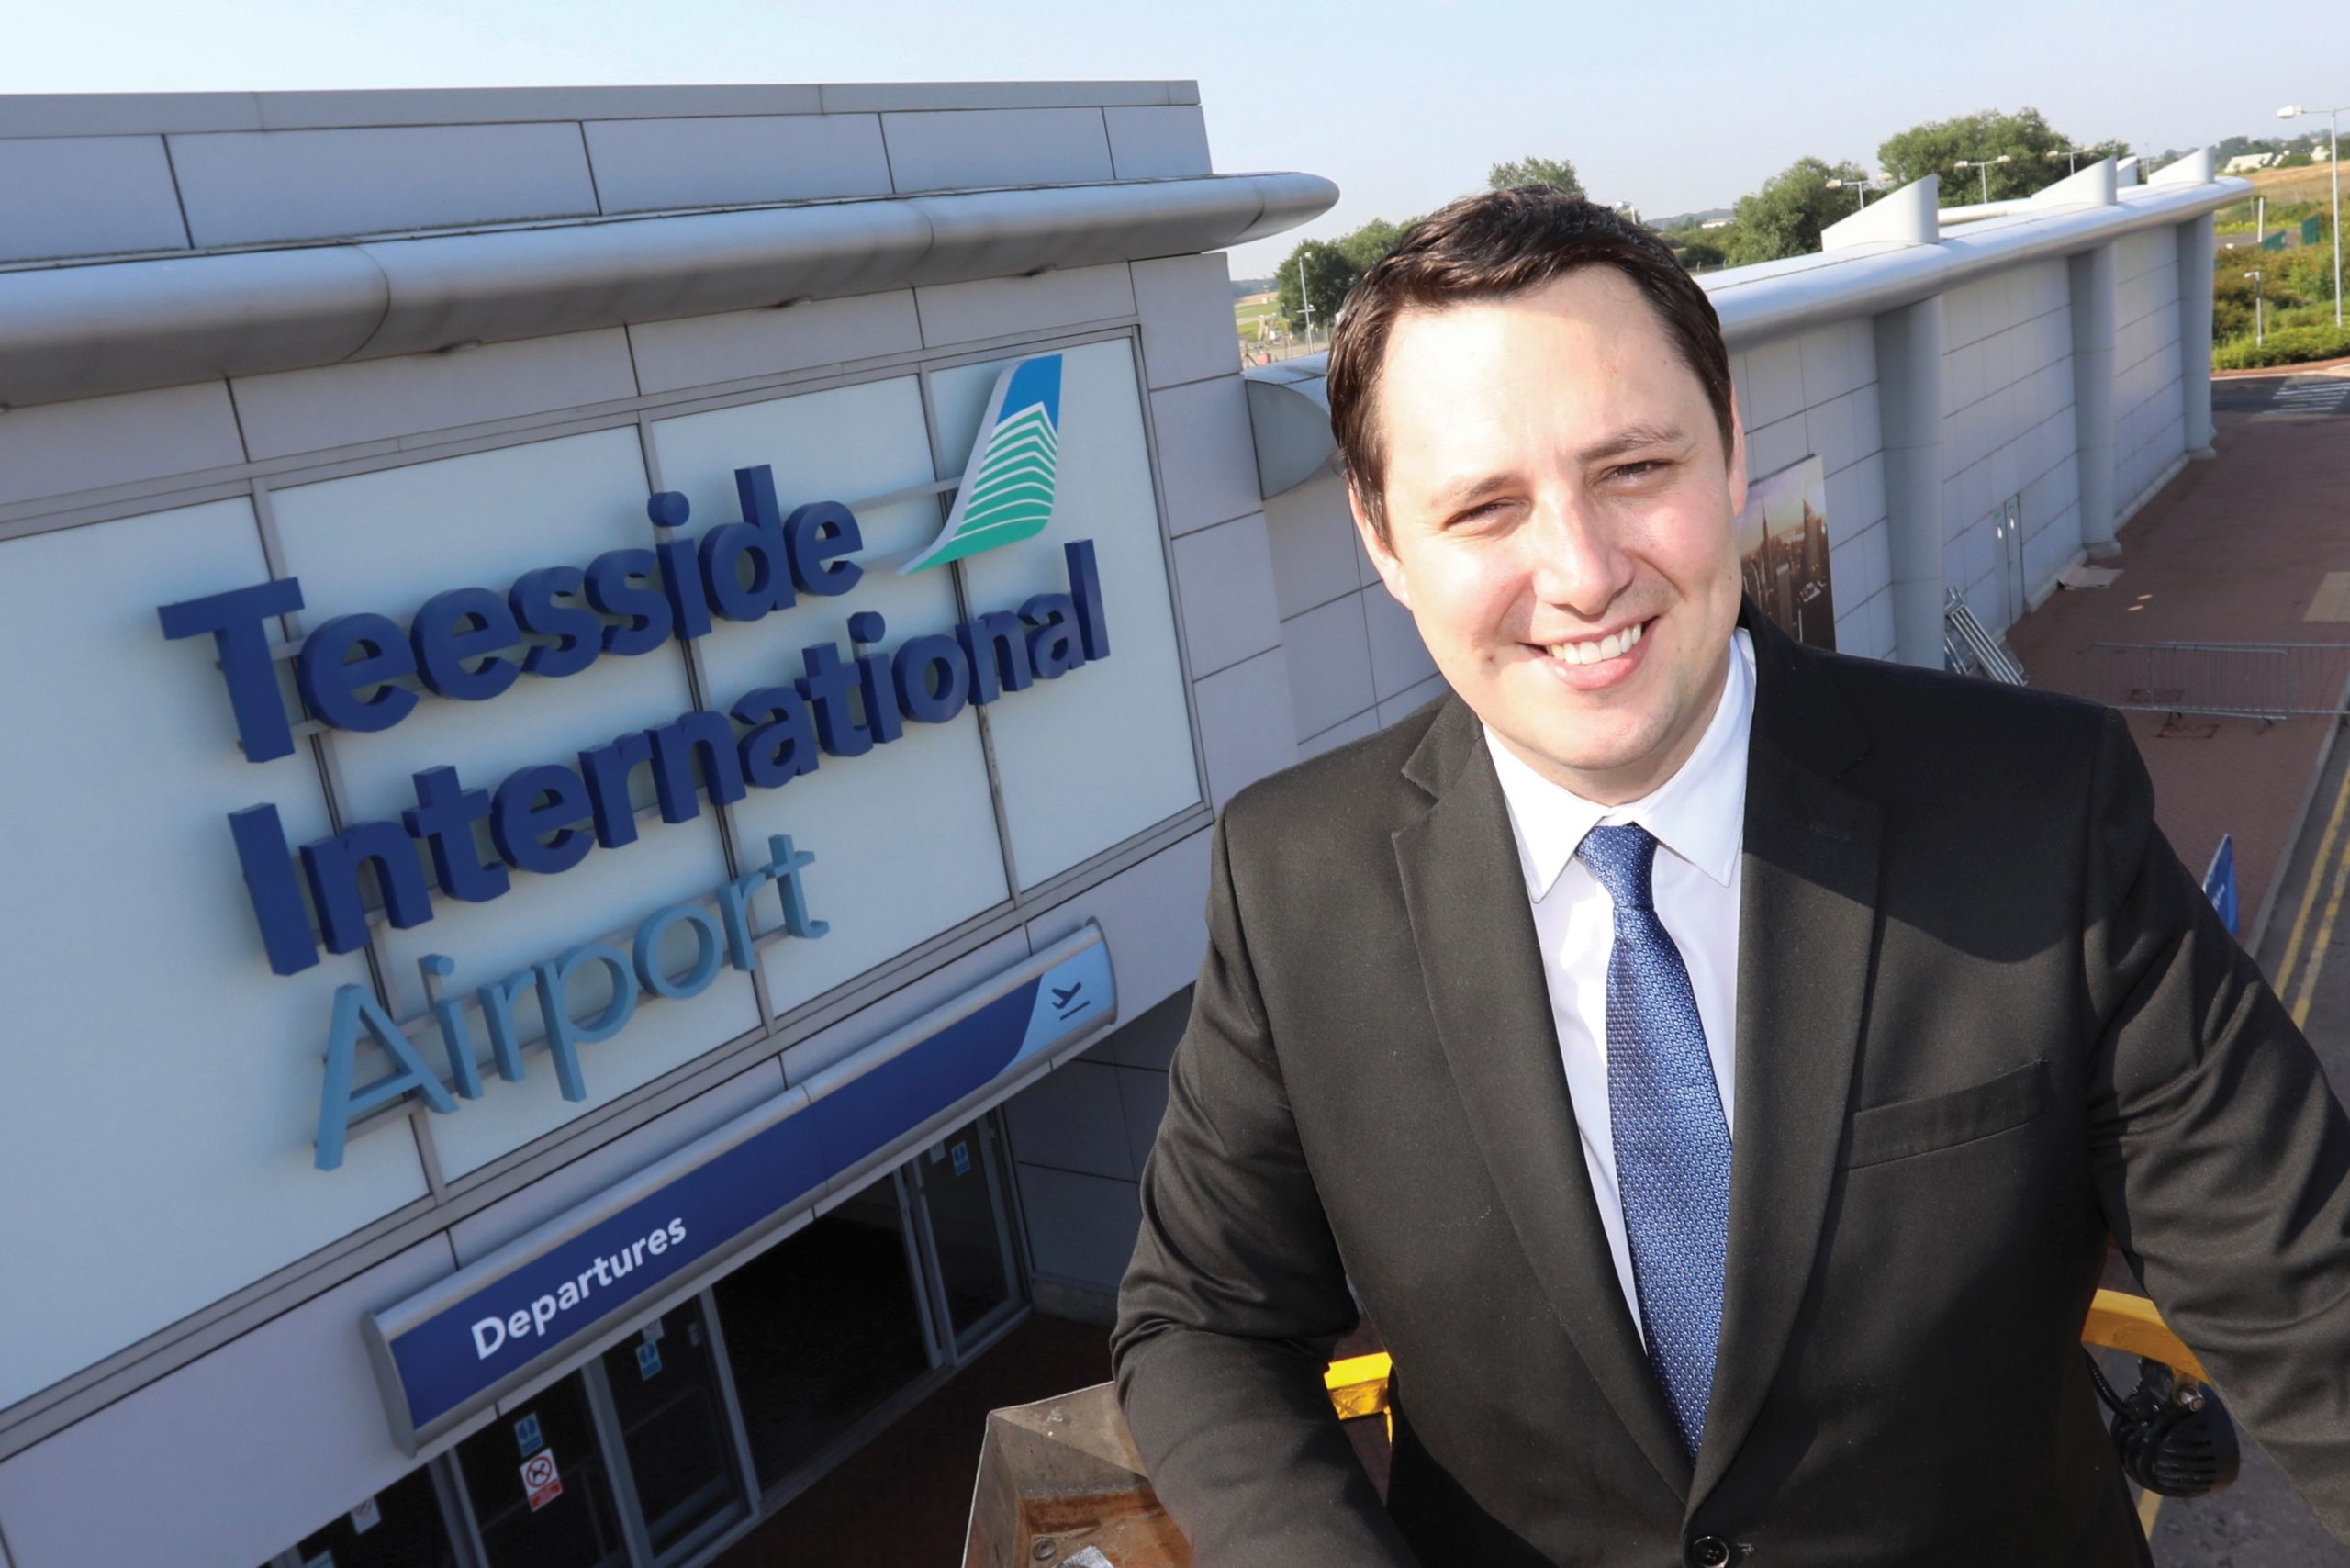 Ben Houchen, Outside of Teesside International Airport | Tees Valley Combined Authority